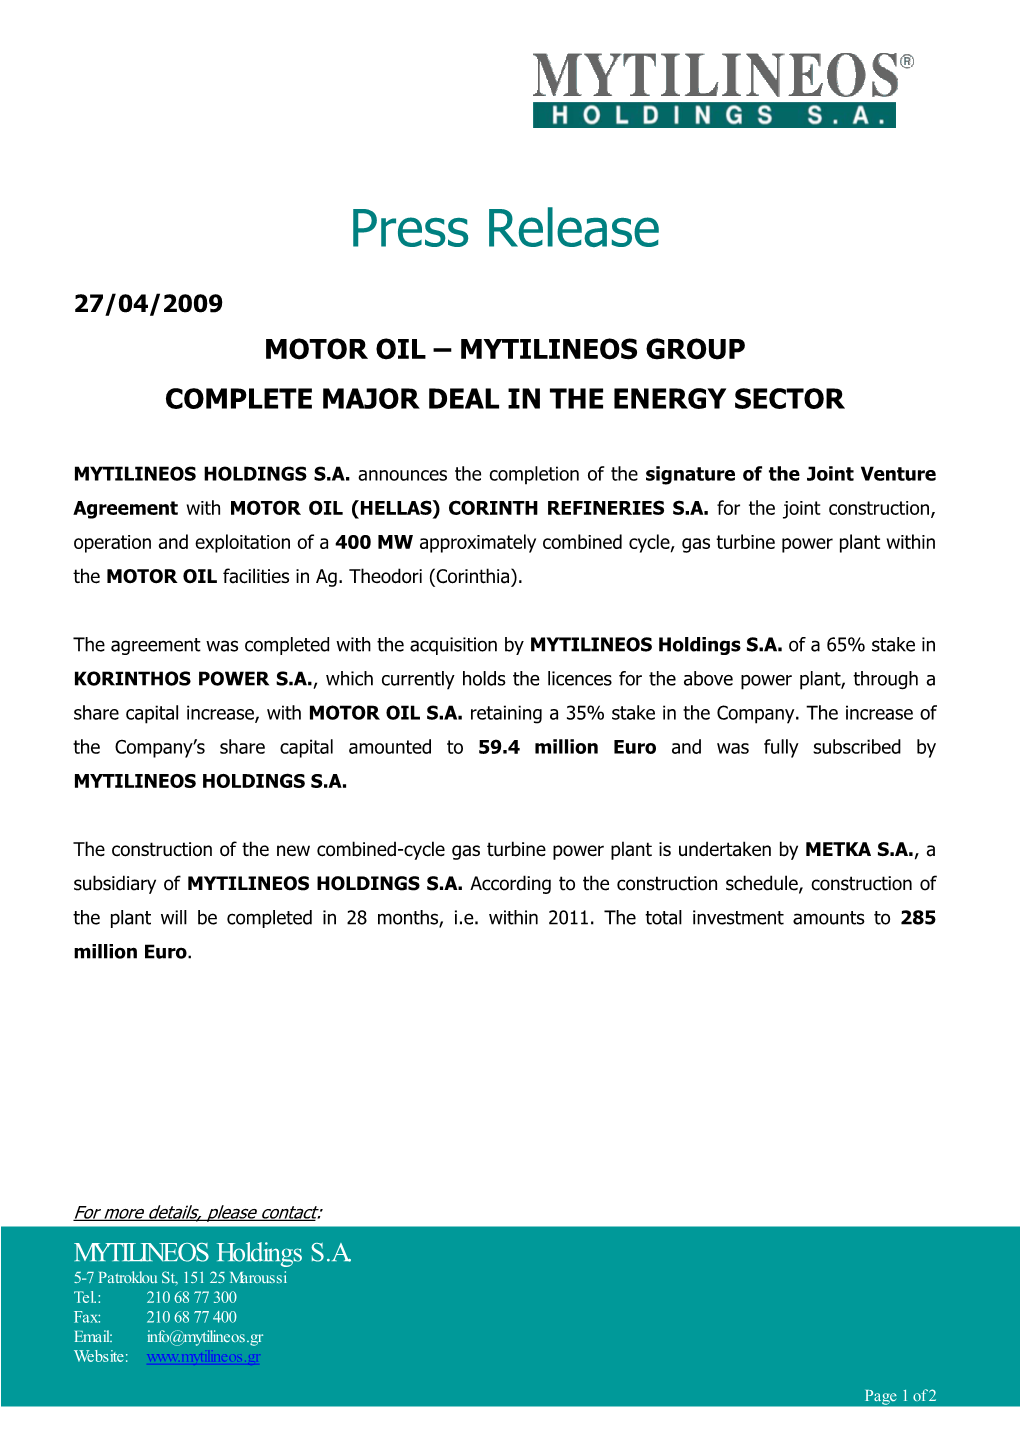 Motor Oil – Mytilineos Group Complete Major Deal in the Energy Sector